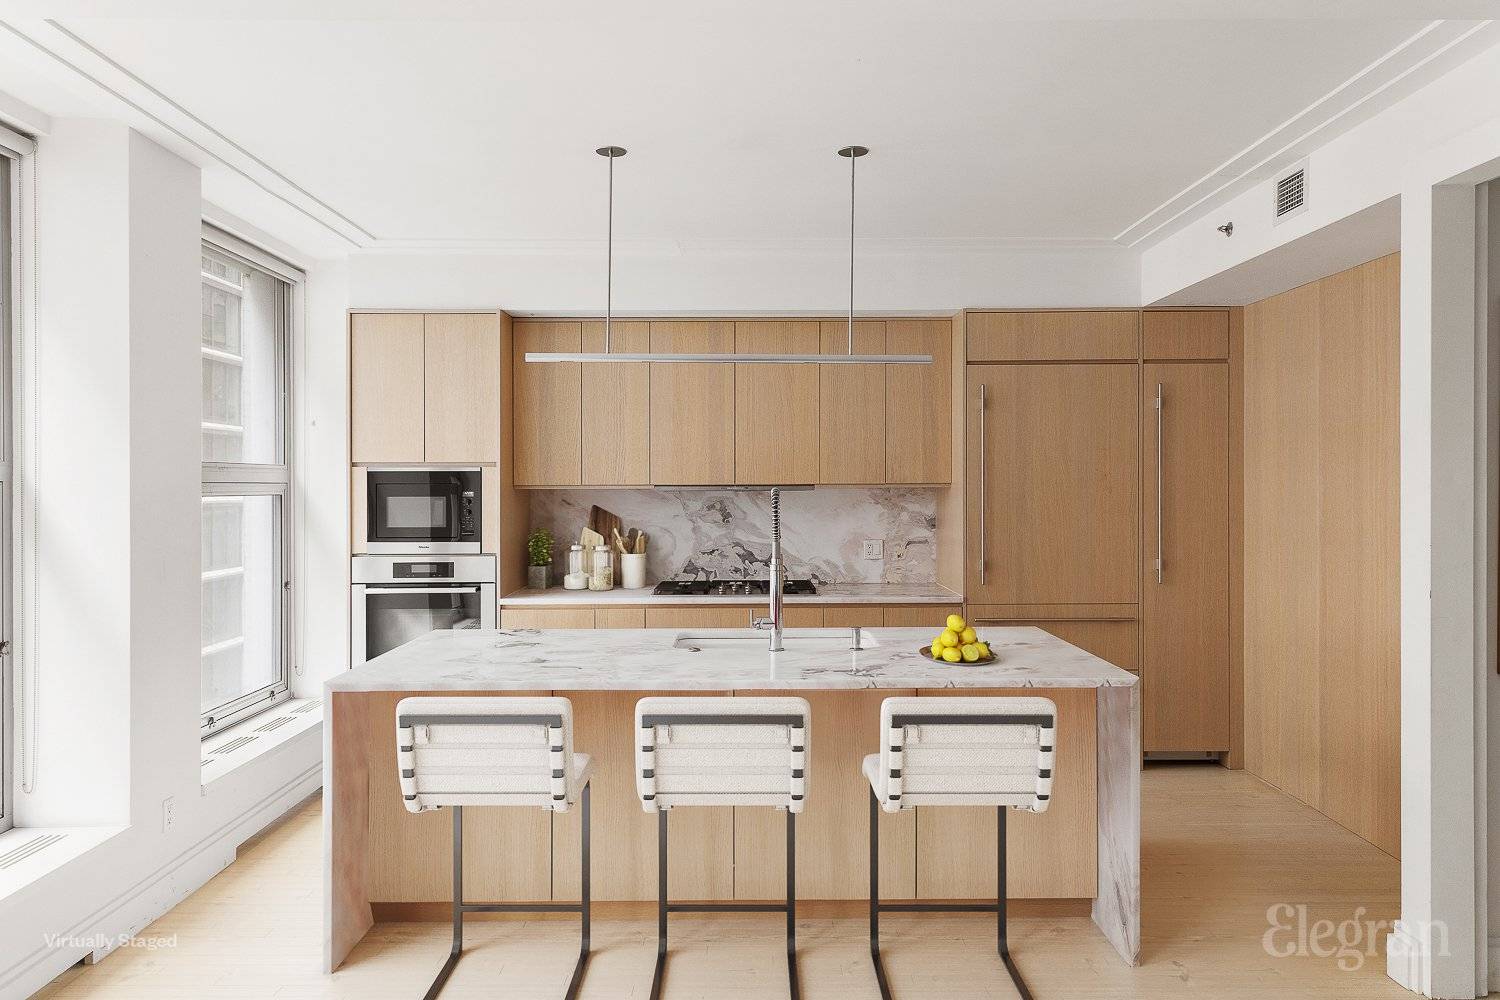 Located in the vibrant Flatiron district, this exquisitely redesigned duplex spans the entire eighth and ninth floors of the boutique condominium at 16W21.